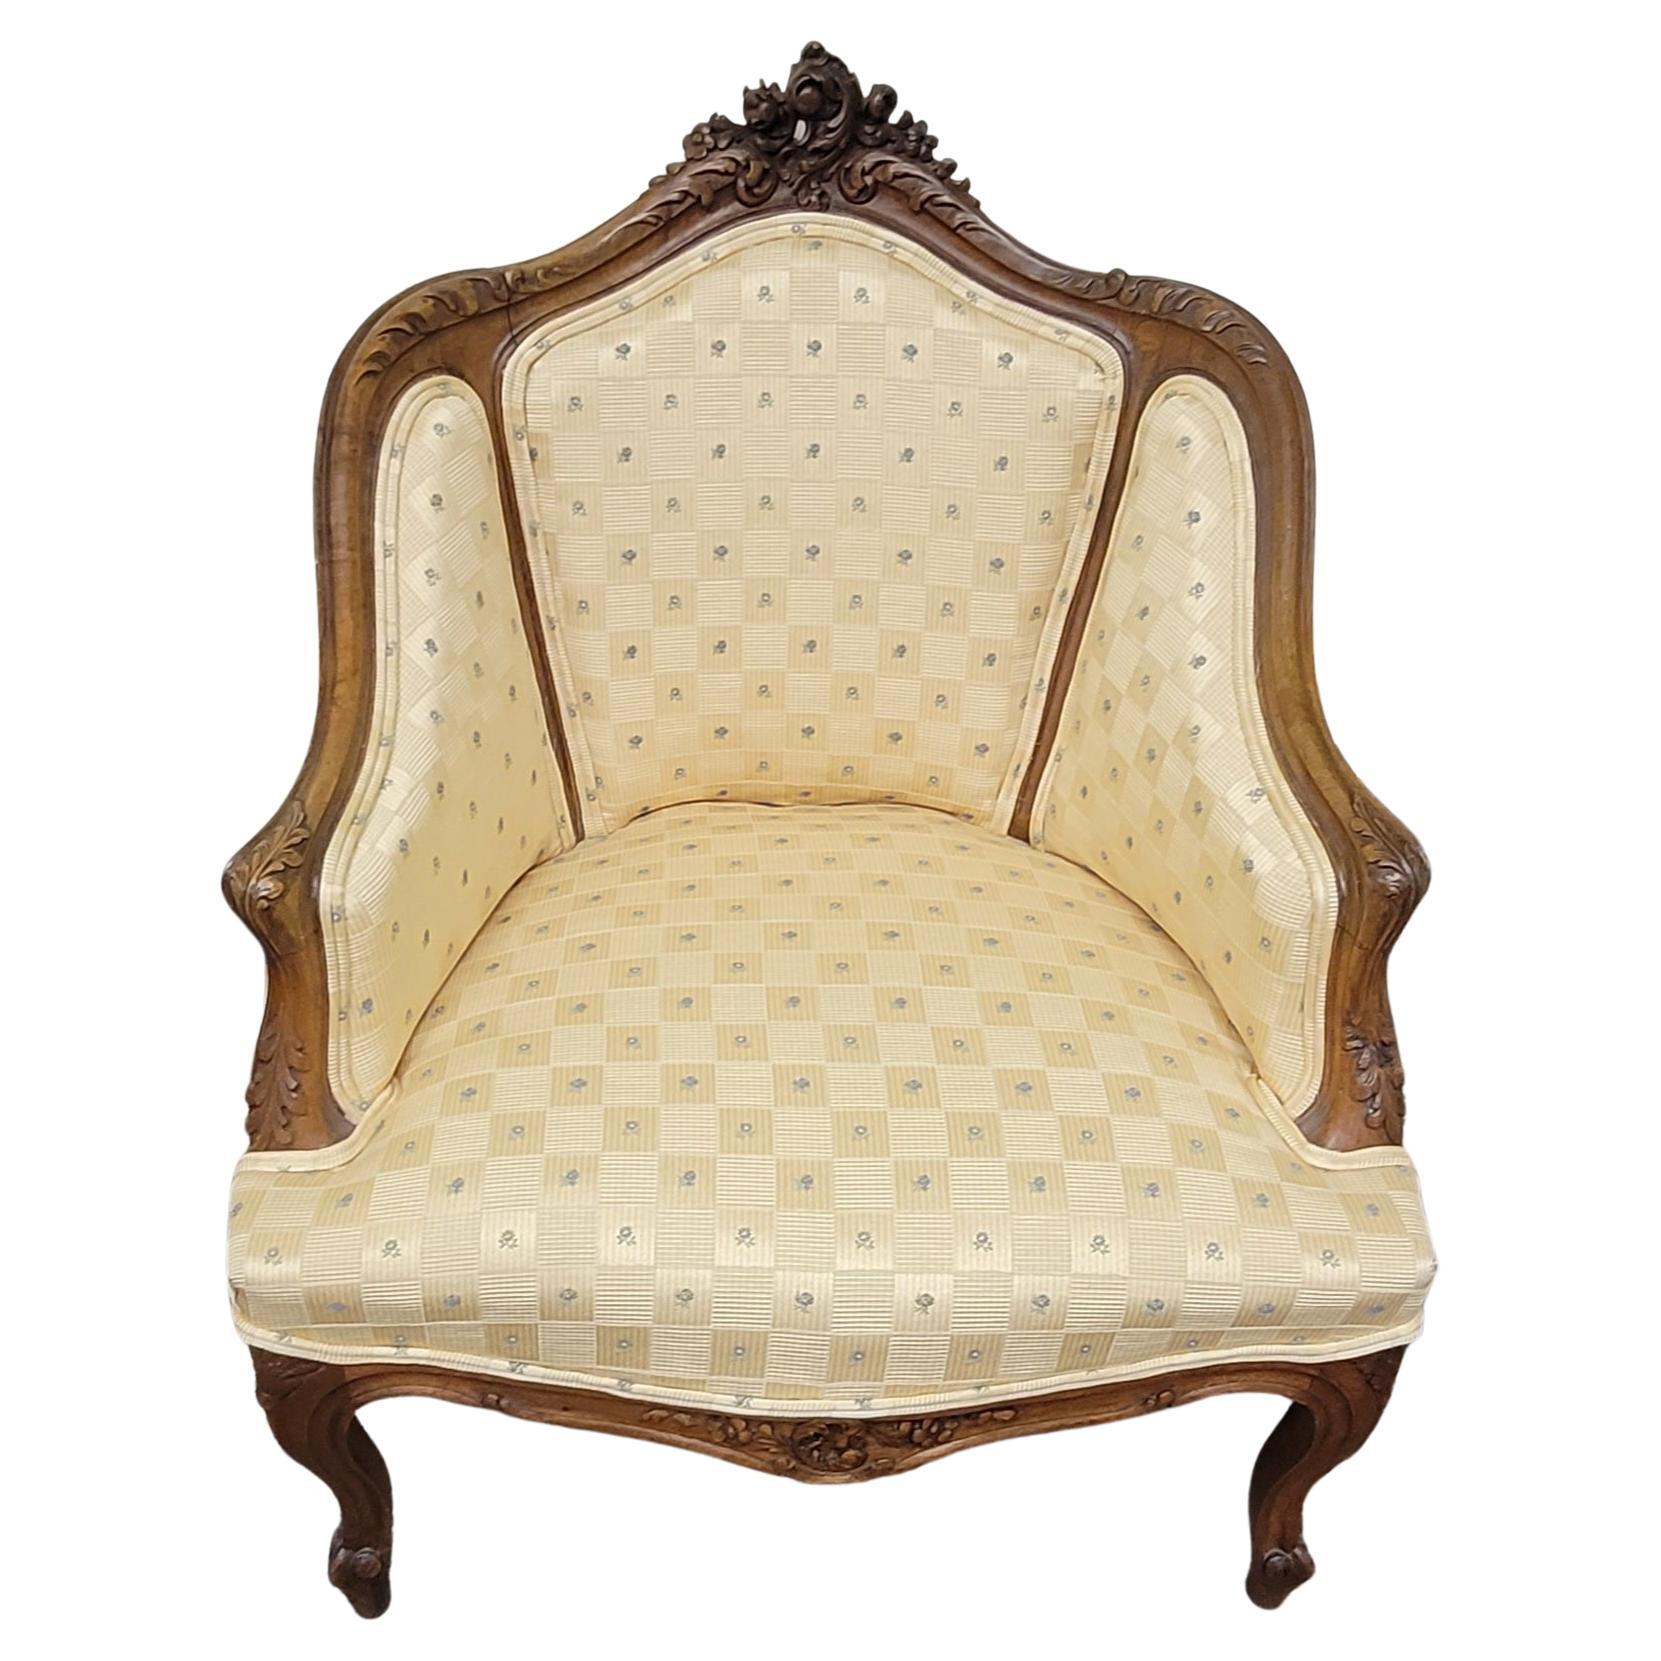 A newly upholstered Louis XVI Provincial carved mahogany Bergère chair. 
Totally restored. Great quality and very fine upholstery work. Very comfortable. Measures 26